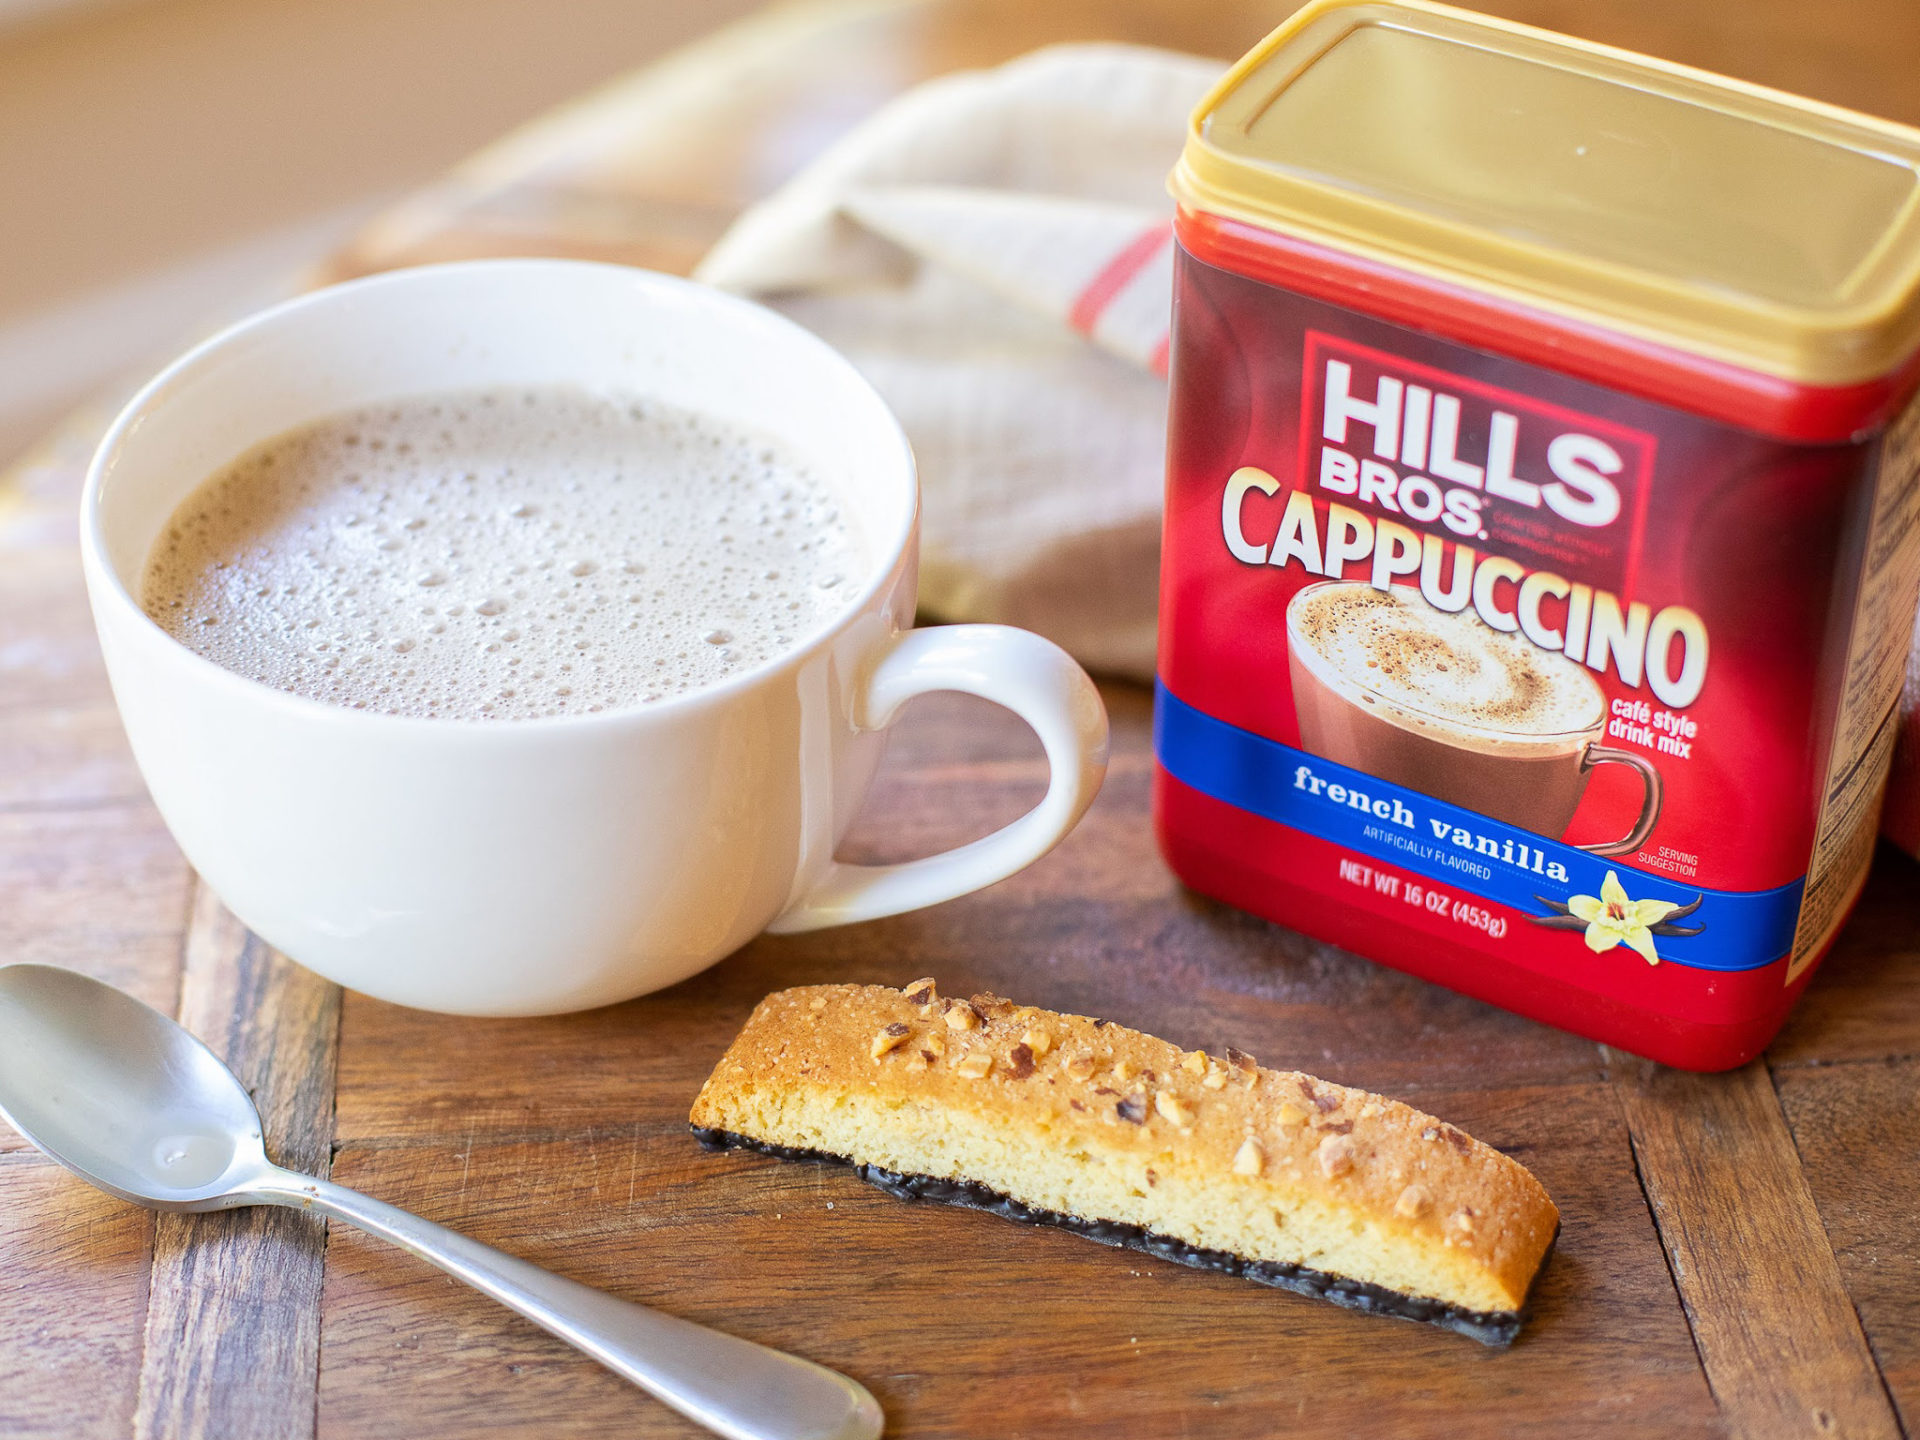 Nice Discount On Hills Bros Cappuccino Drink Mix At Kroger – As Low As $2.74 (Almost Half Price)